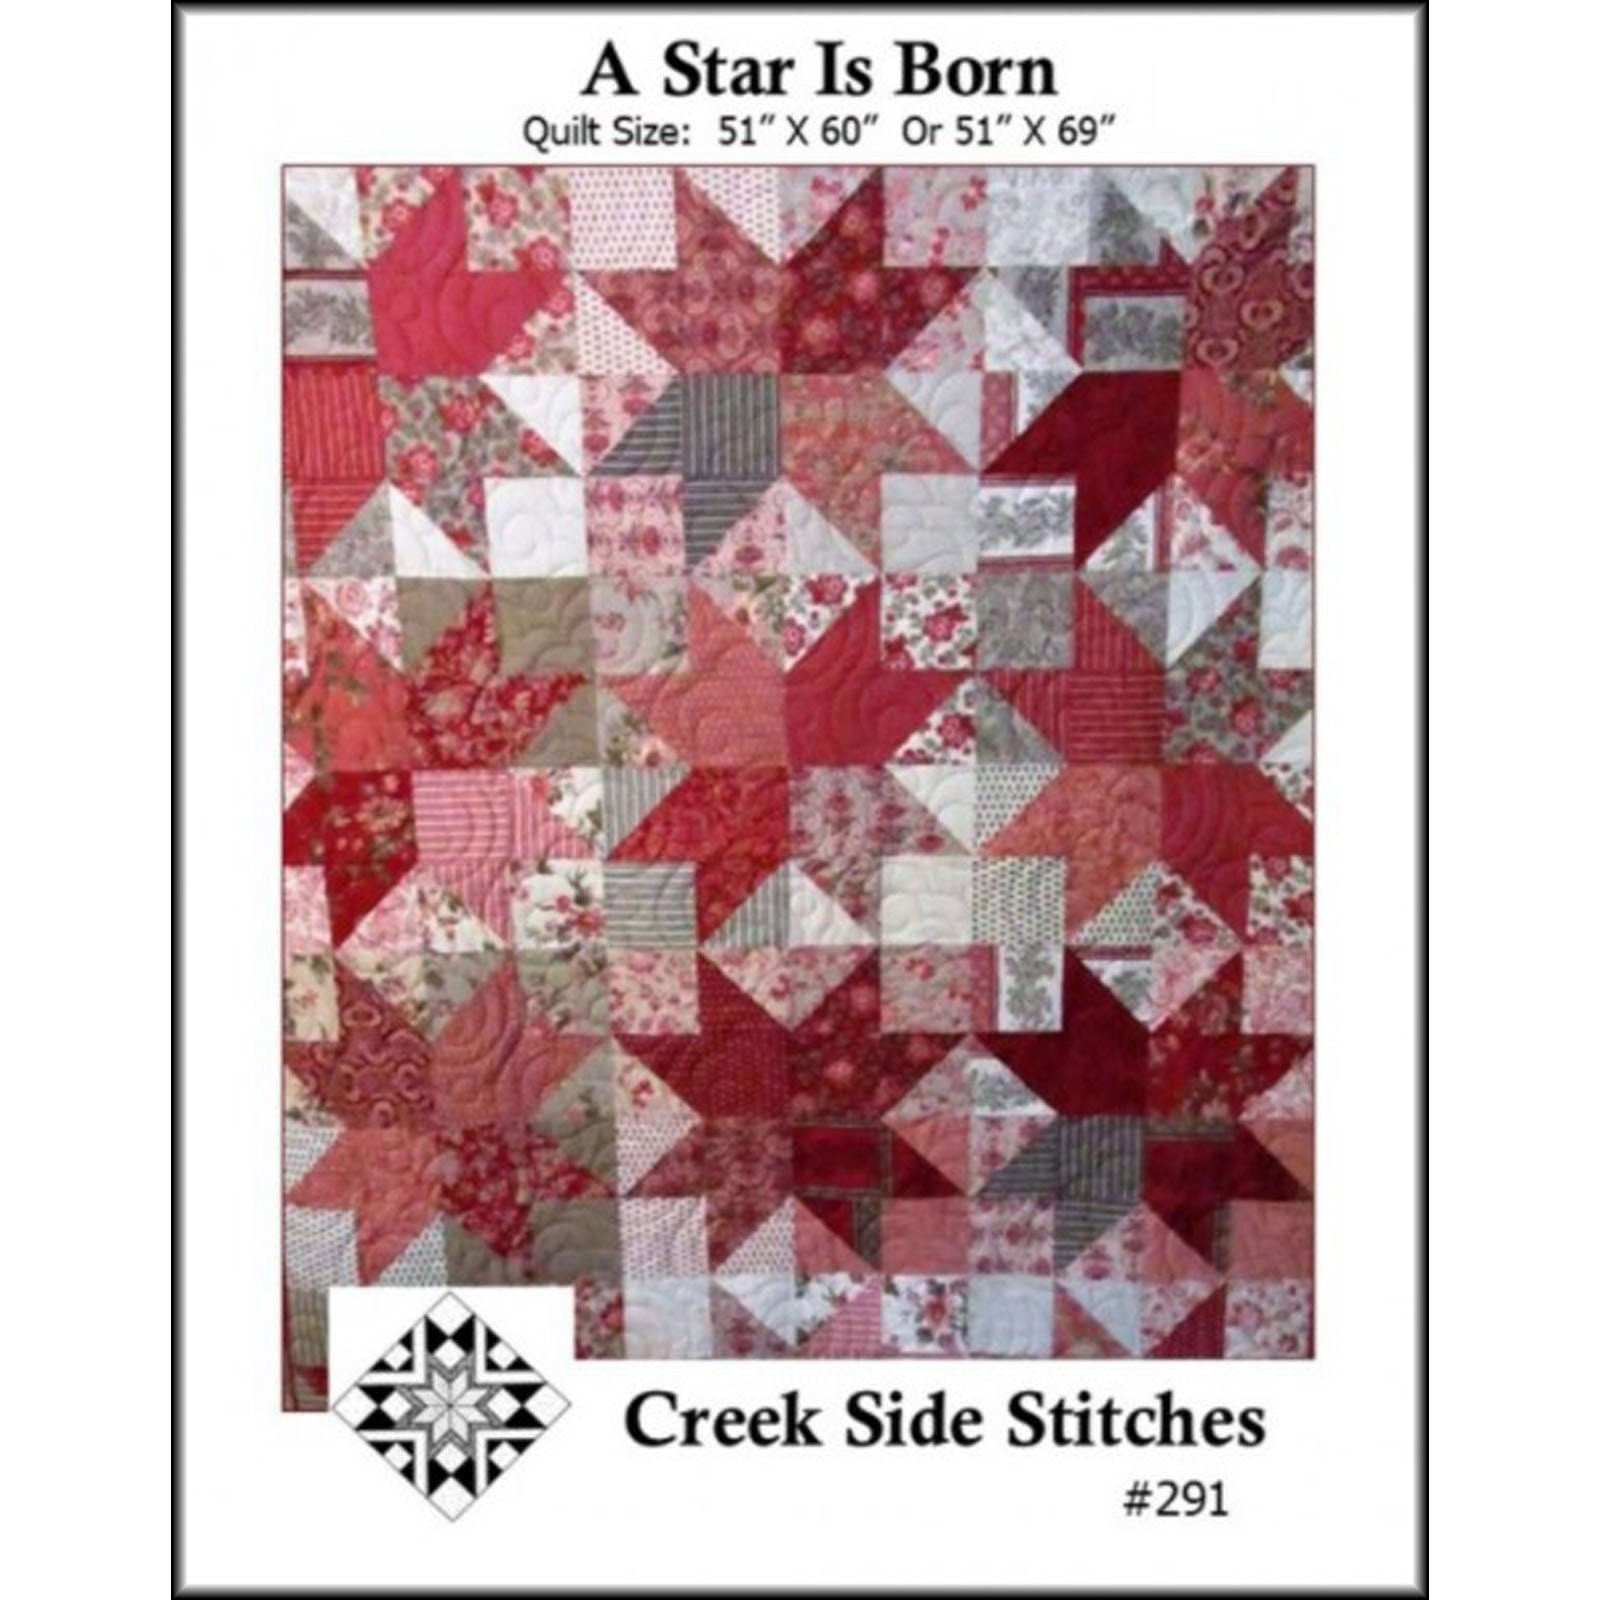 Star Quilt Patterns PDF & Free Pillow Pattern Easy Quilting Patterns  Scrappy Quilts With Fat Quarters or Scraps Patriotic Quilt QOV 